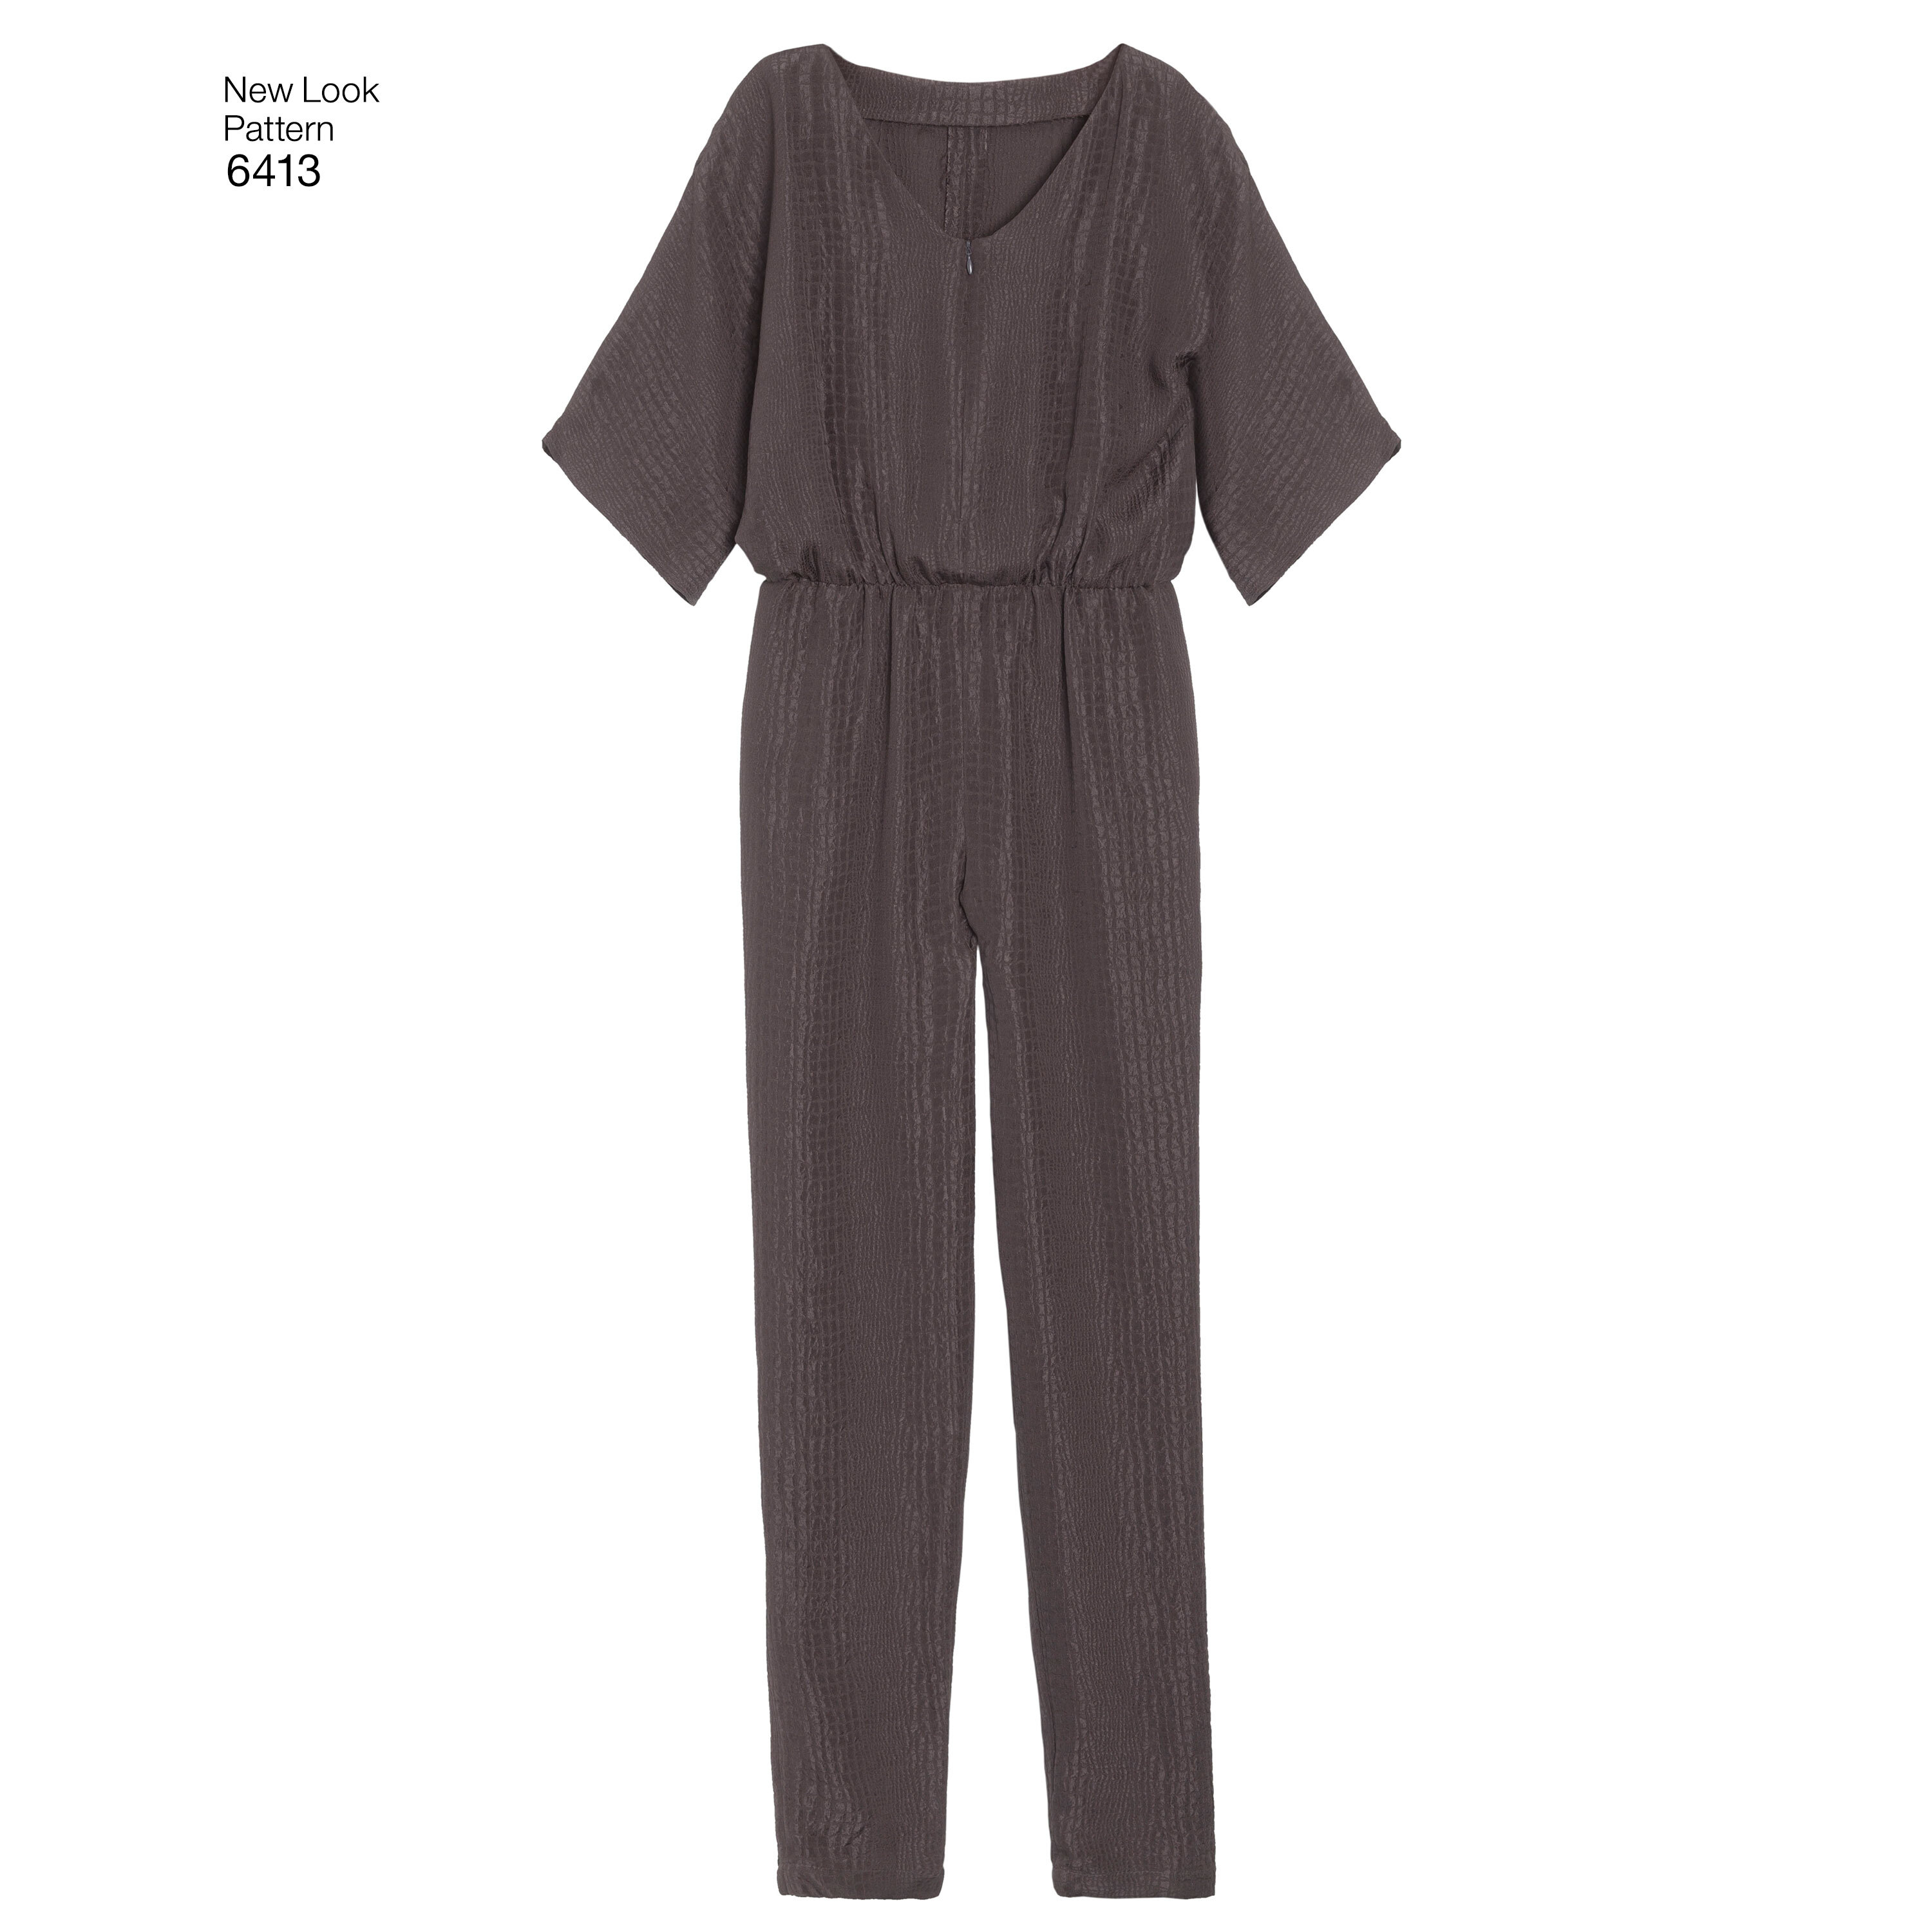 New Look Pattern 6413 Misses' Jumpsuit and Dress in Two Lengths